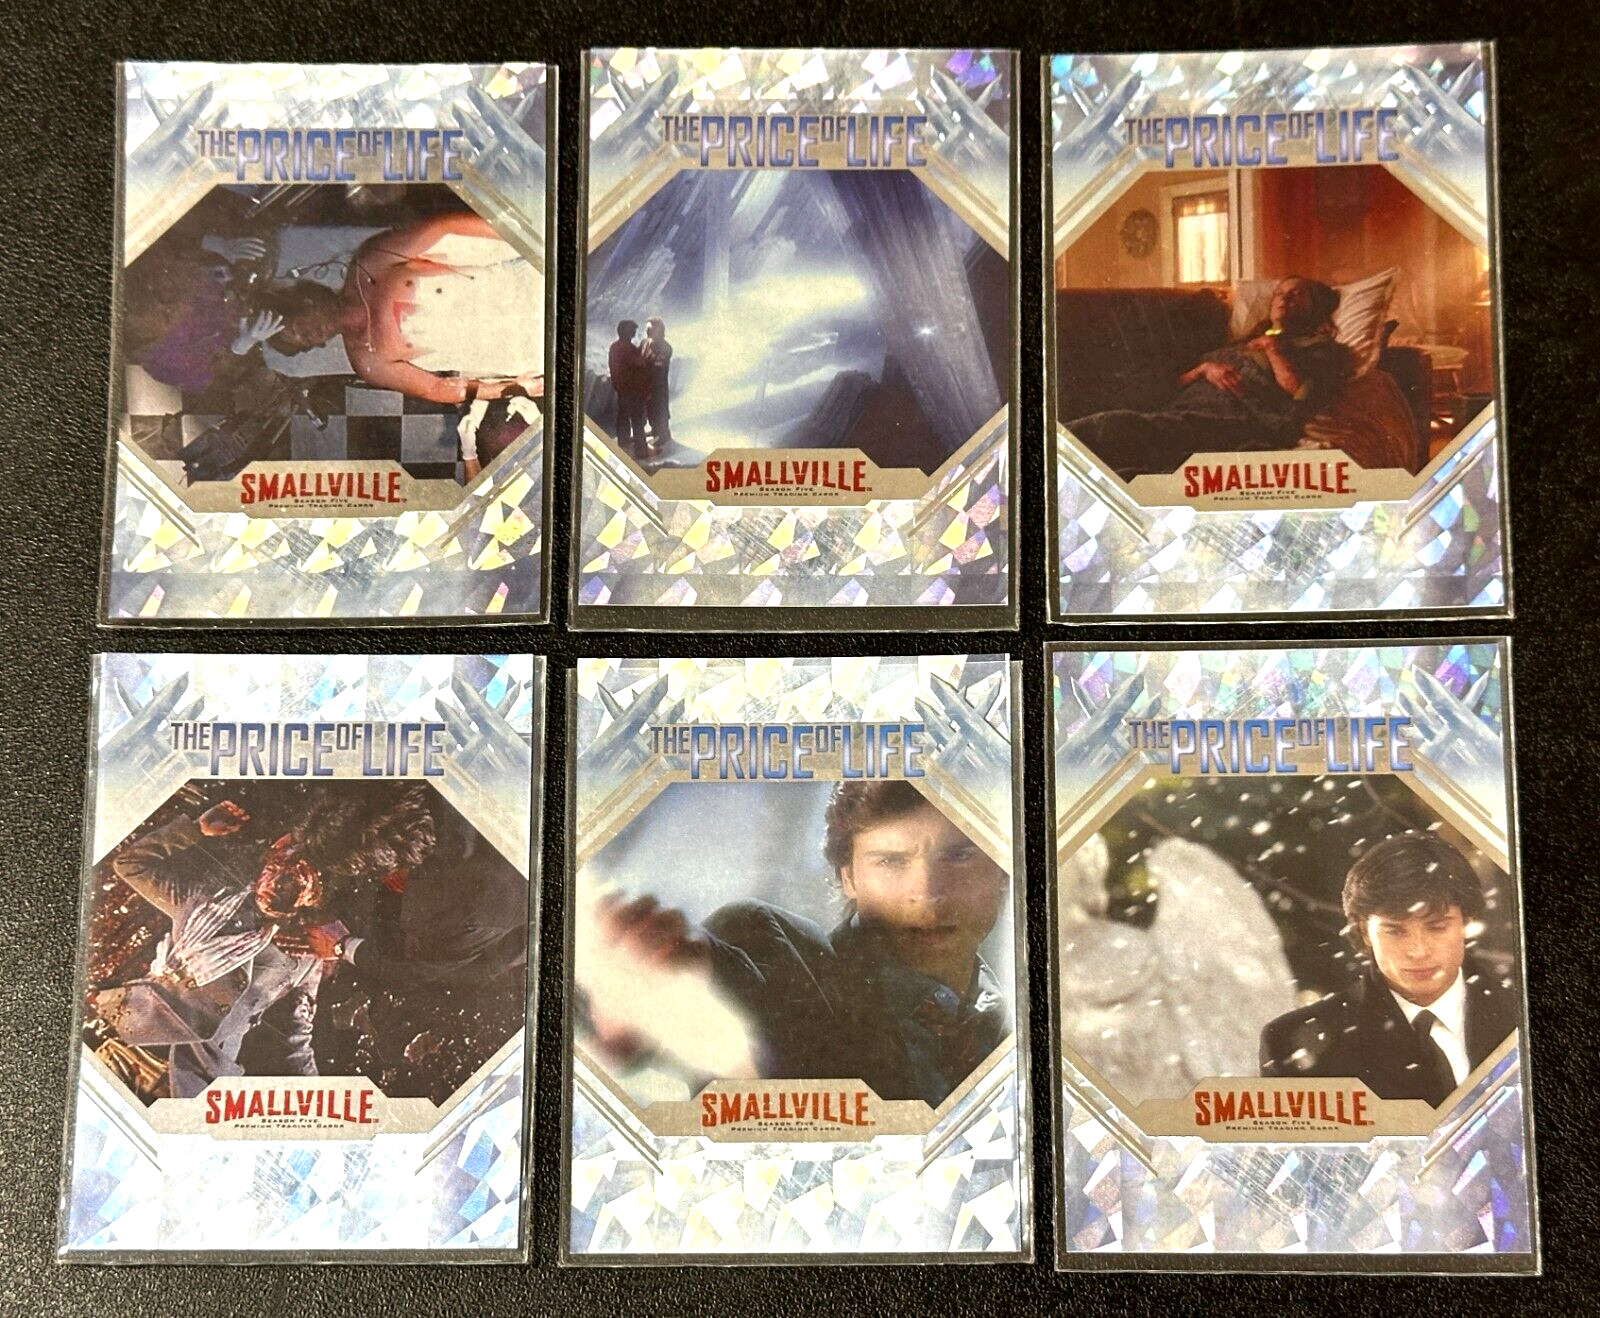 2006-07 Smallville Season 5 The Price of Life Card Set PL1-PL6 from Inkworks